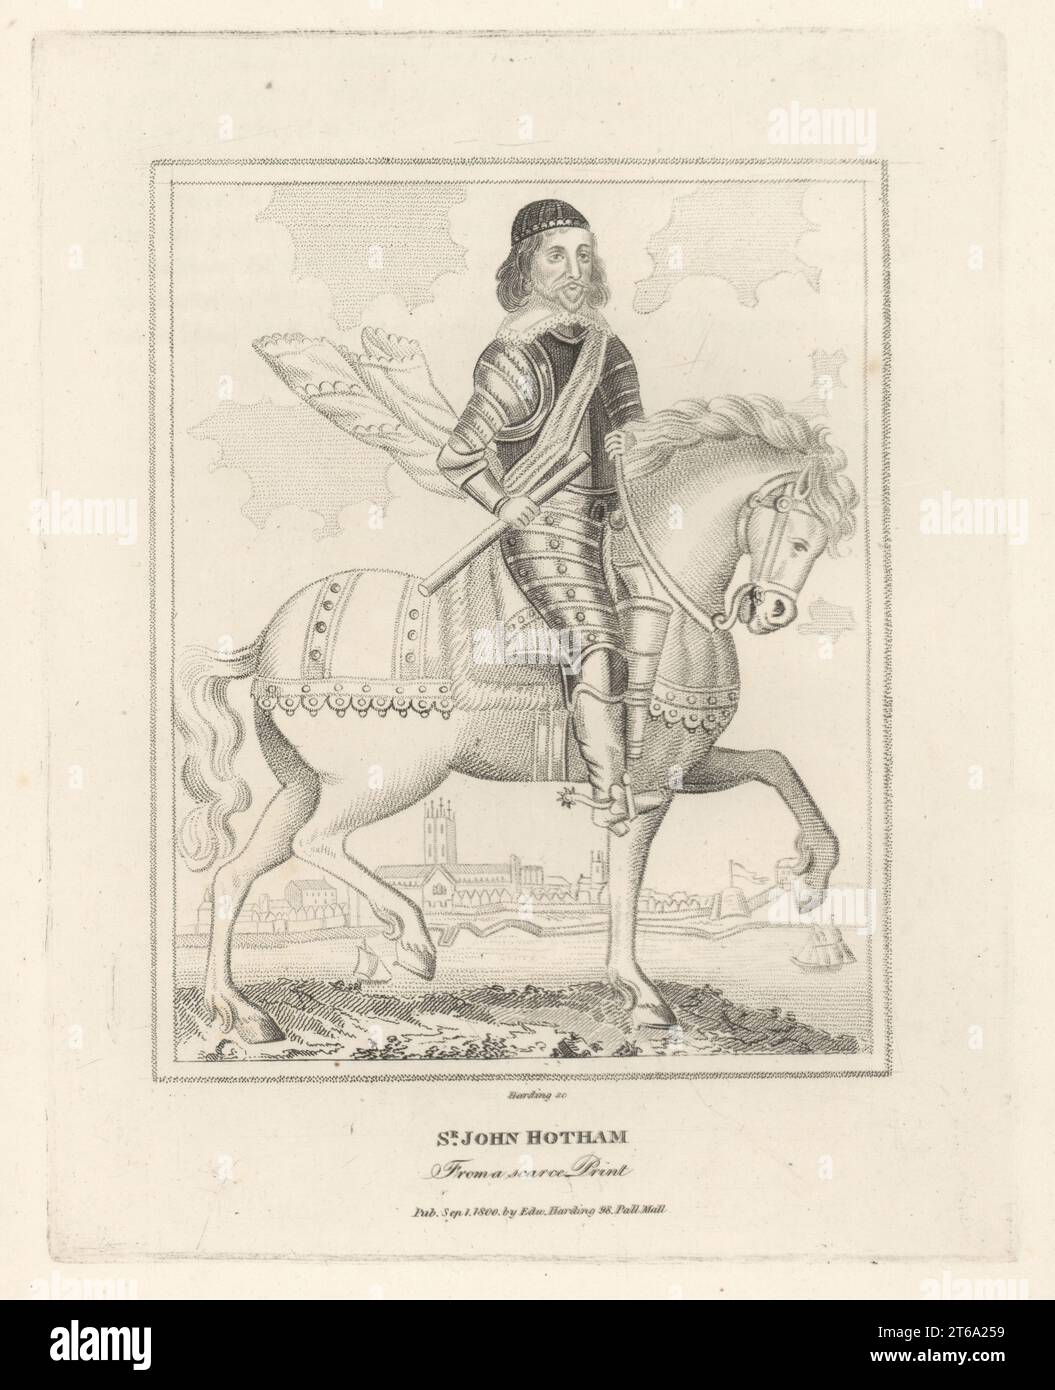 Sir John Hotham, 1st Baronet of Scorborough Hall, Yorkshire, c.1589-1645. Governor of Hull, Parliamentary soldier in the English Civil War, executed for treason. In cap, suit of plate armour, boots with spurs, holding a baton, mounted on a horse with pistol holster. View of Hull from the Humber with Holy Trinity Church (now Hull Minster) and the Citadel (fortress). Copperplate engraving by Edward Harding from John Adolphus The British Cabinet, containing Portraits of Illustrious Personages, printed by T. Bensley for E. Harding, 98 Pall Mall, London, 1799. Stock Photo